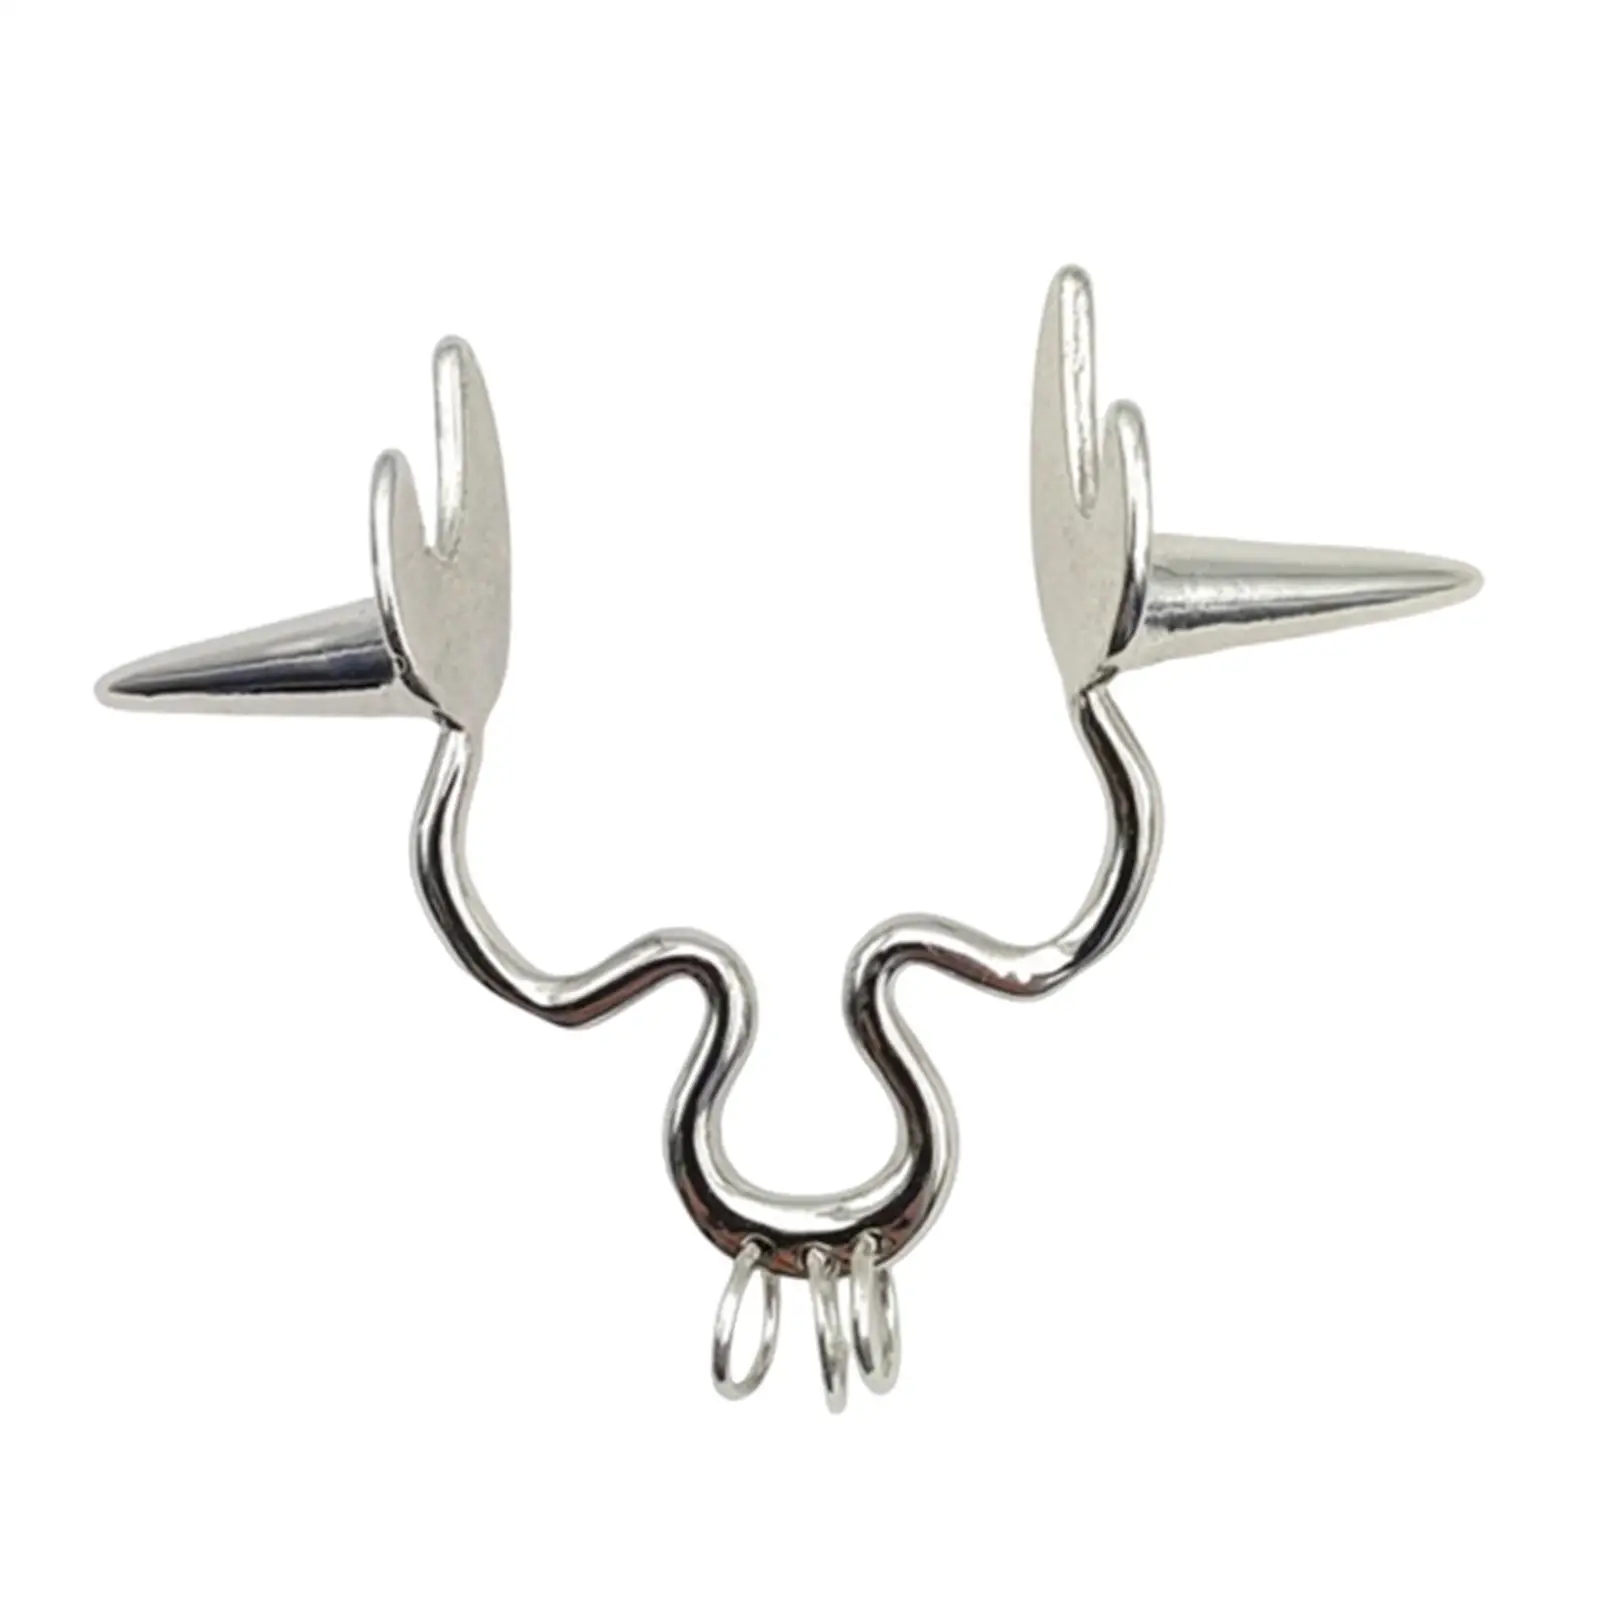 Pointed Cone Nose Ring Nose Piercings Jewelry for Women Men Nose Cuffs Rings